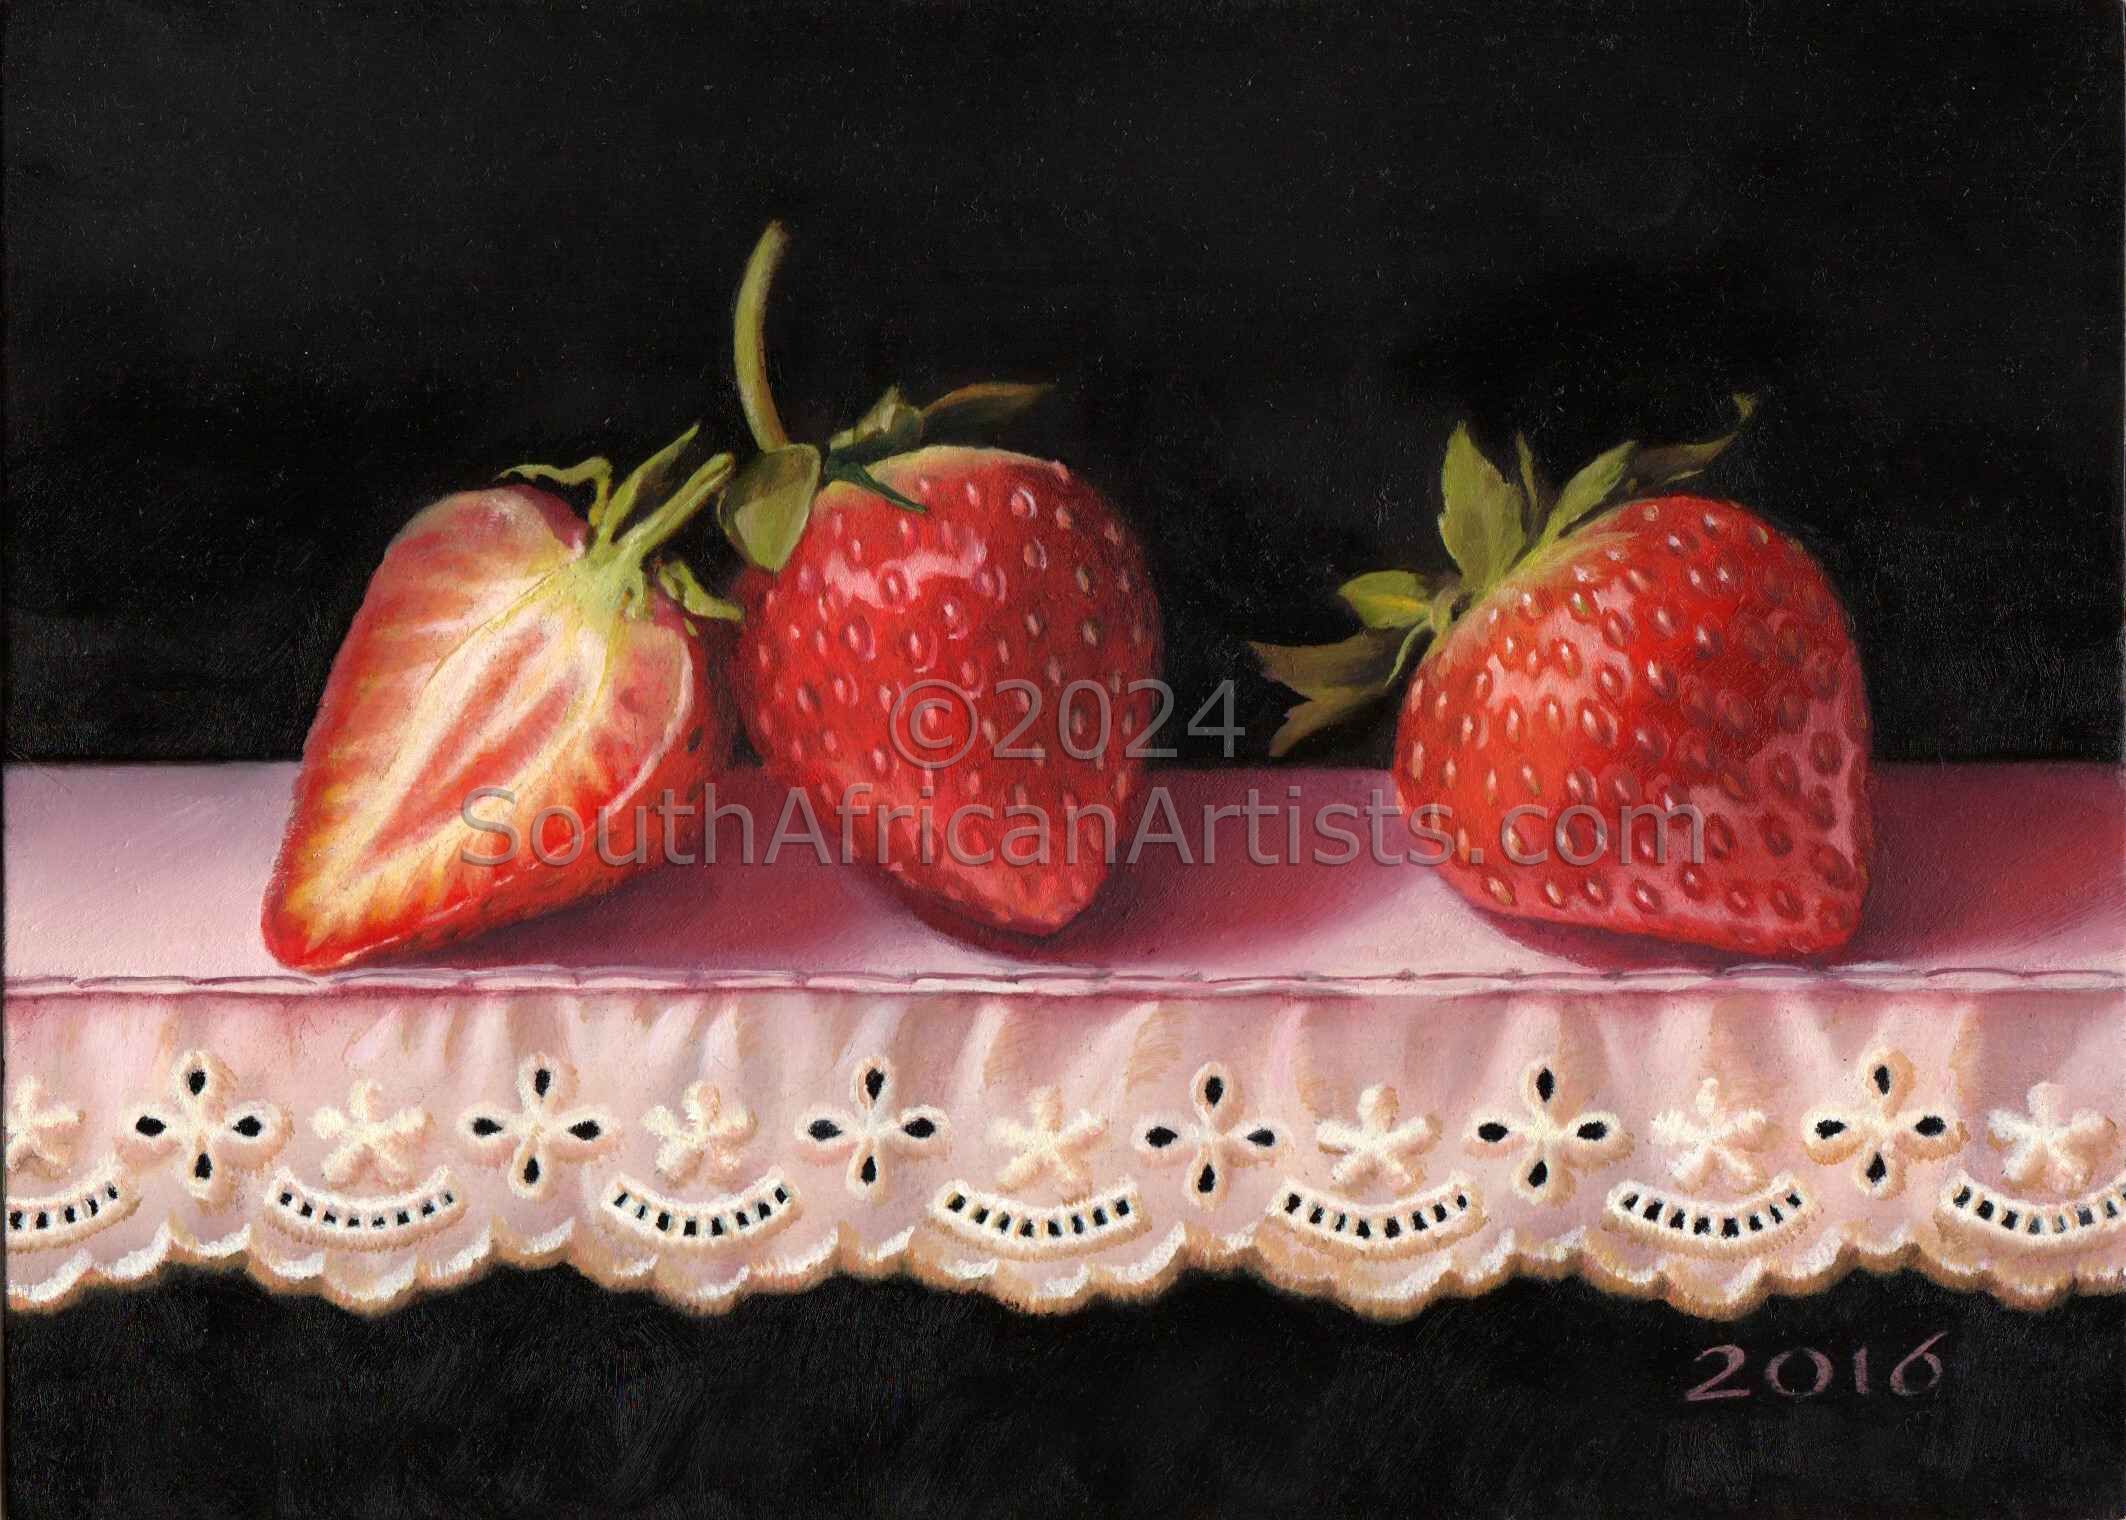 Strawberries on Lace